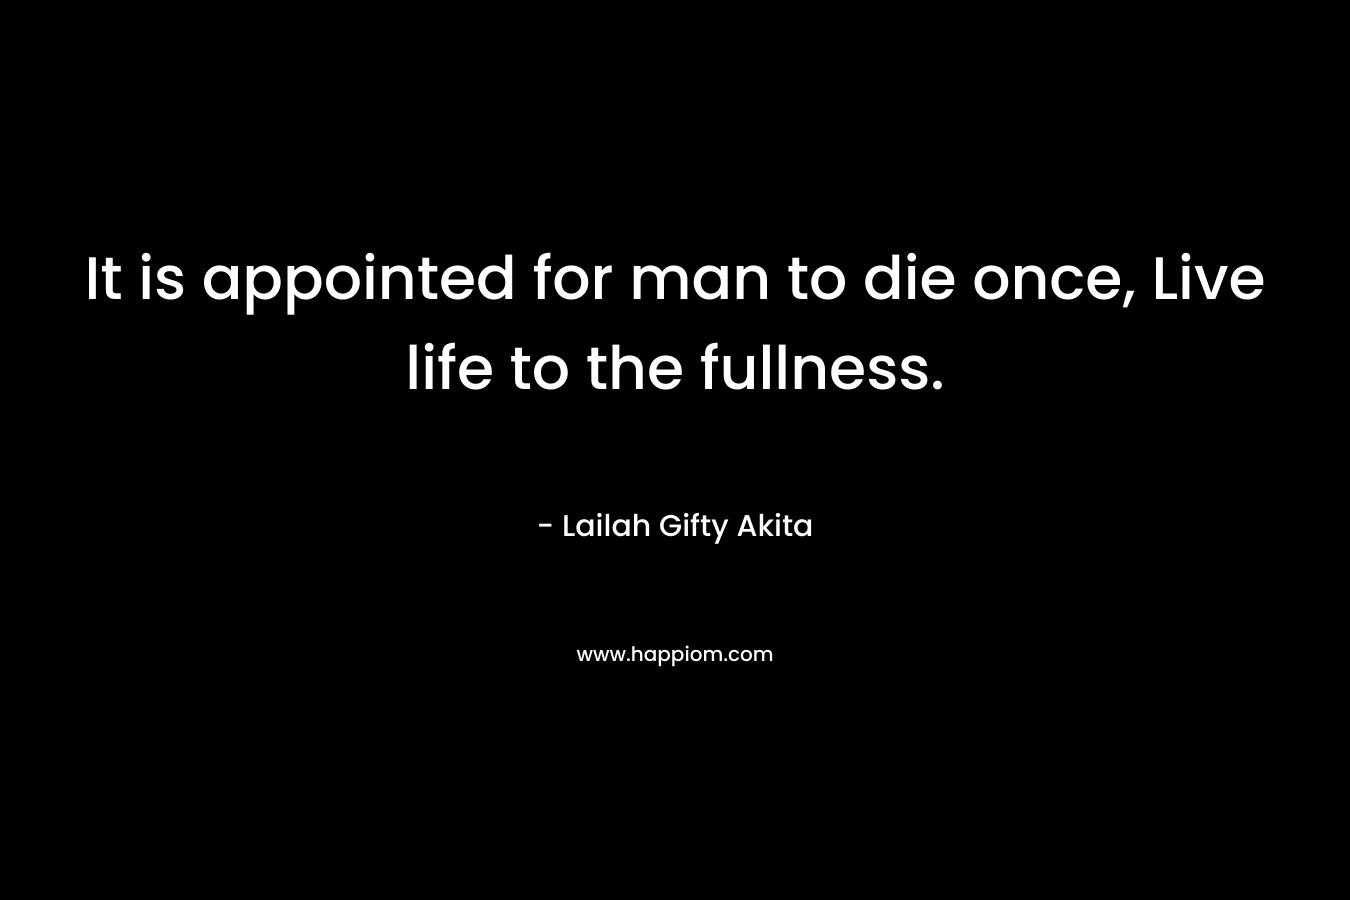 It is appointed for man to die once, Live life to the fullness.